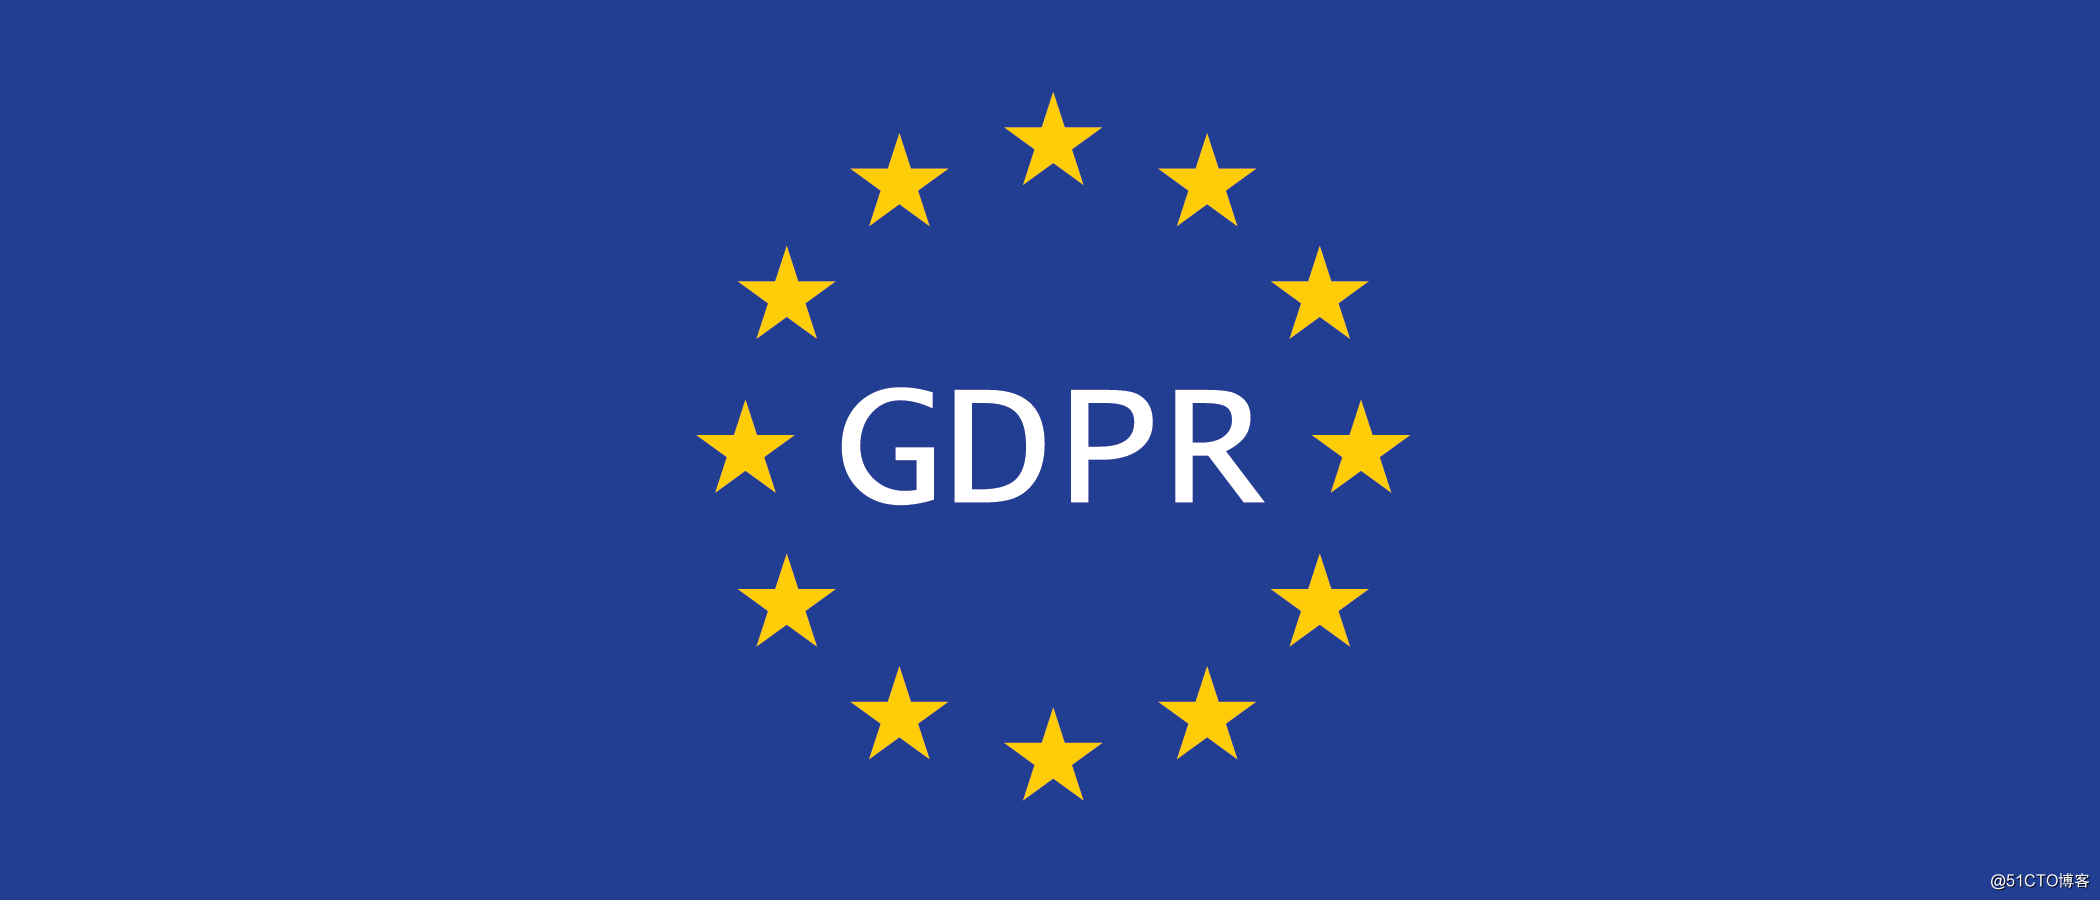 5 things you need to know about GDPR